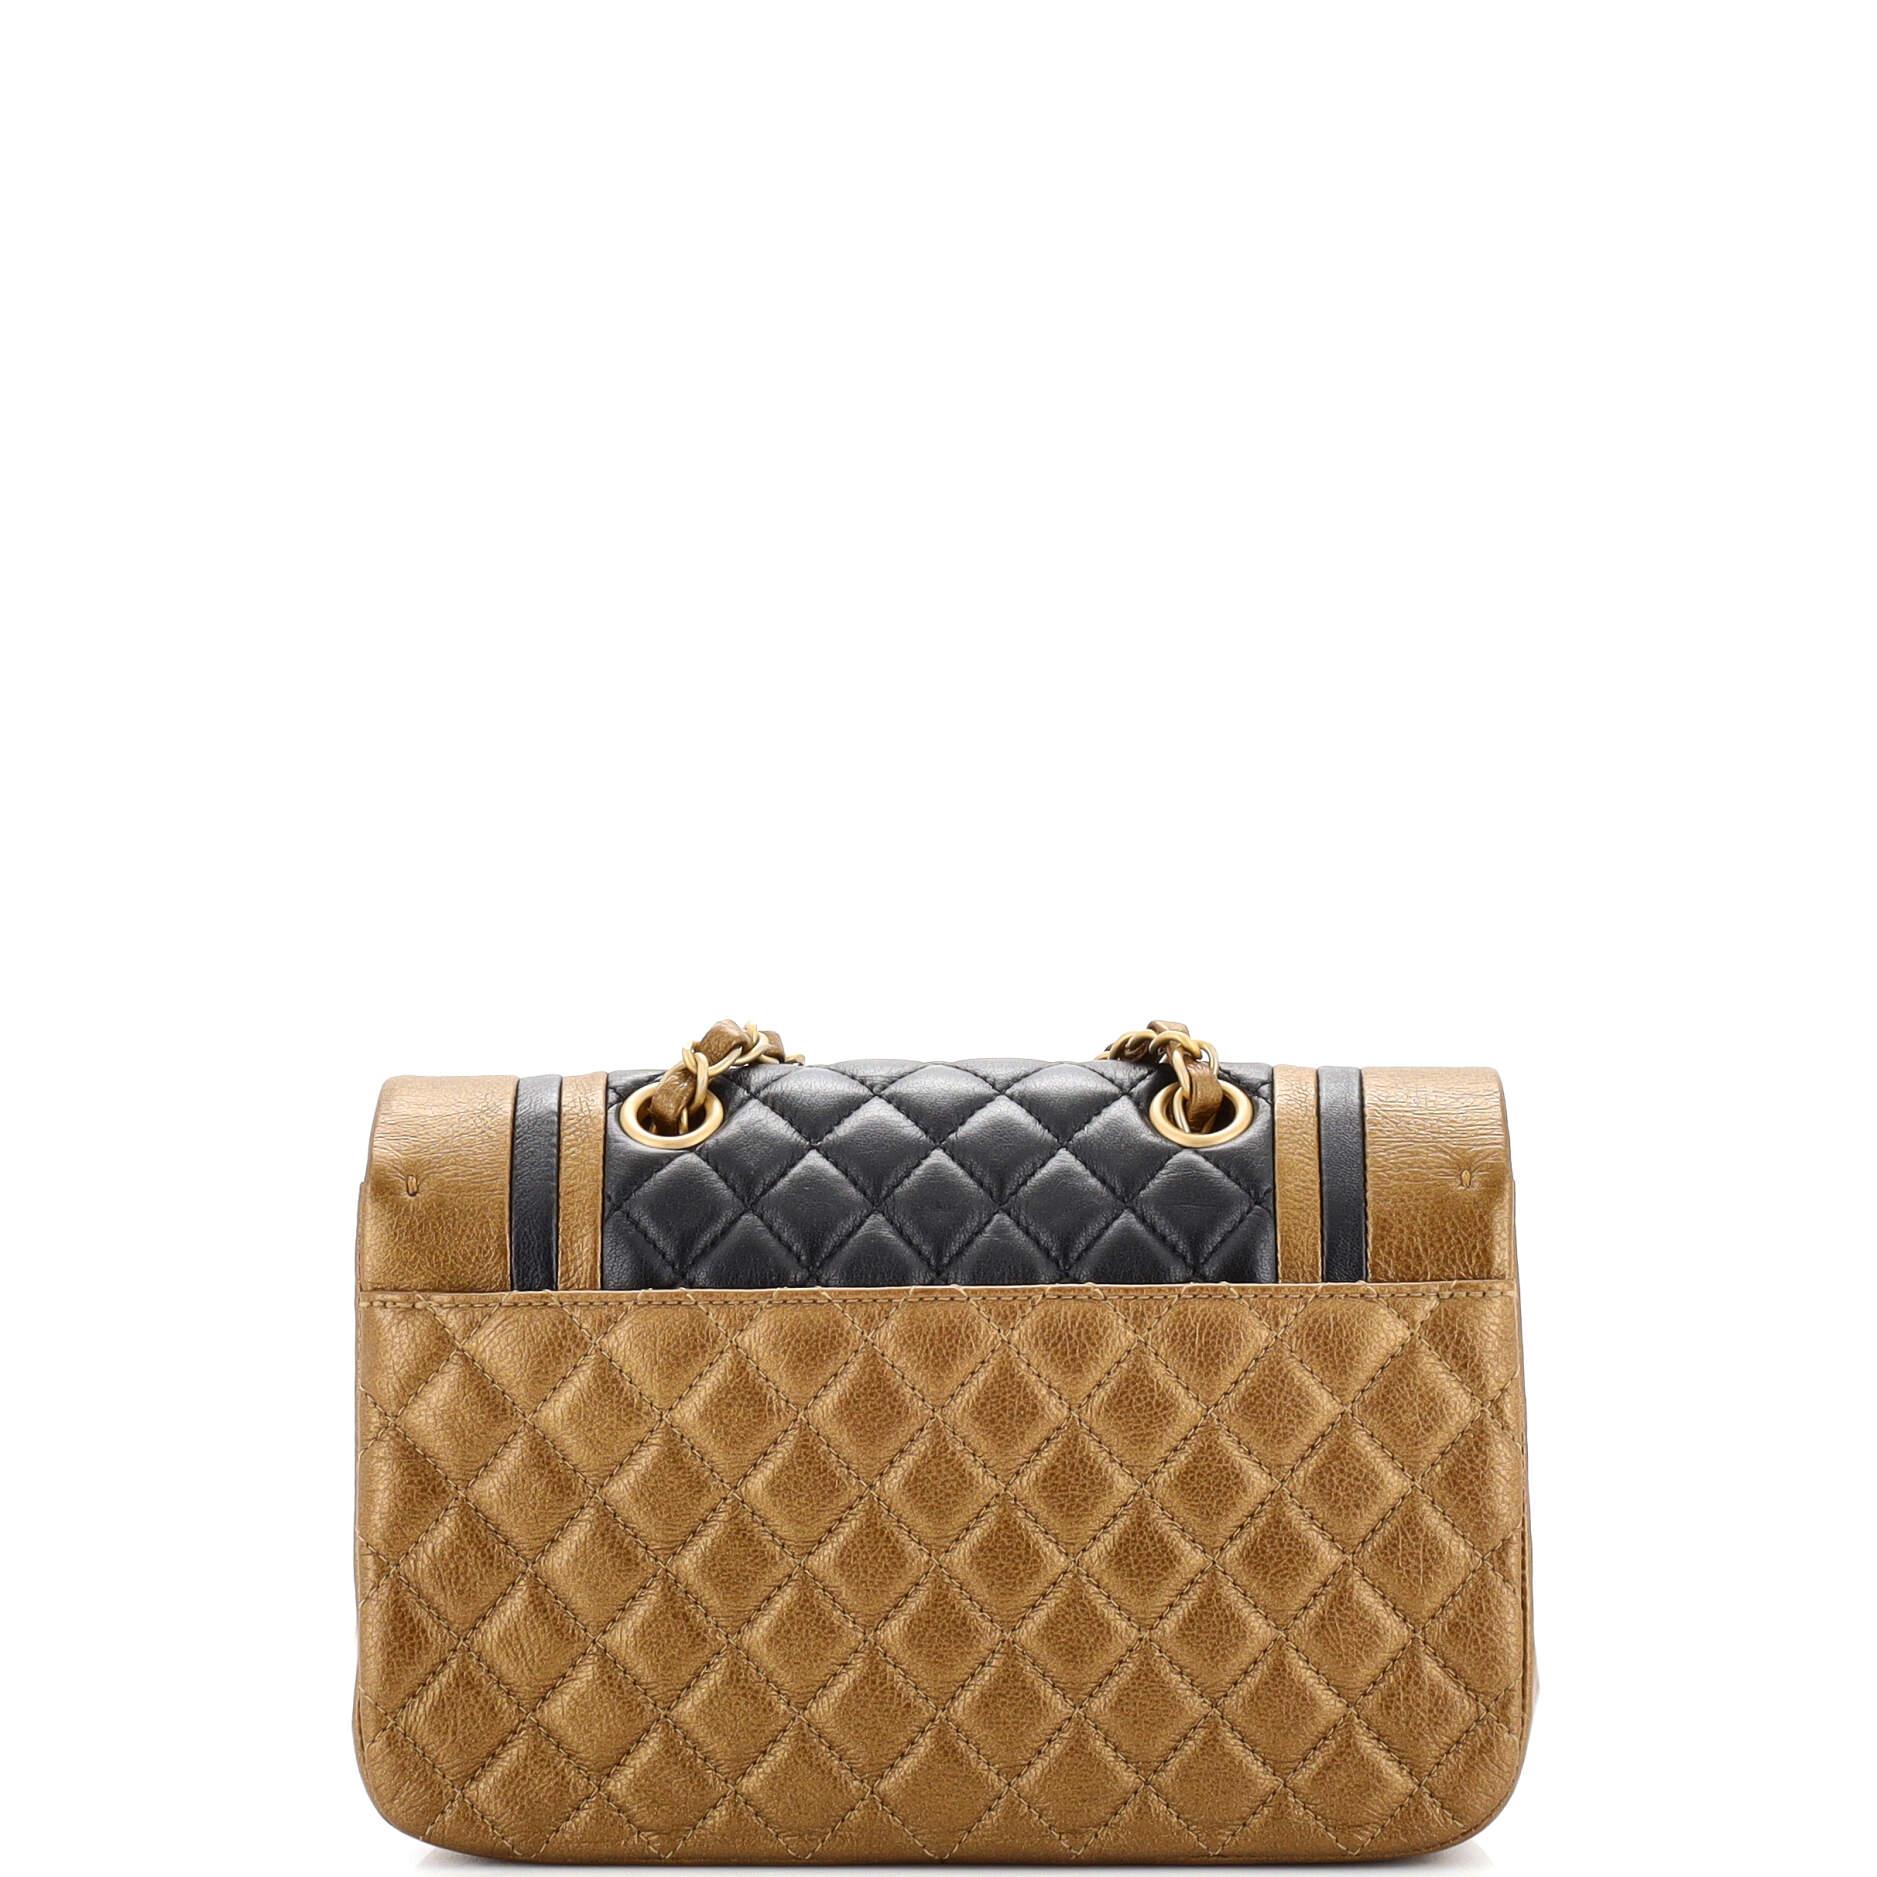 Women's or Men's Chanel Two Tone CC Flap Bag Quilted Lambskin and Metallic Calfskin Medium